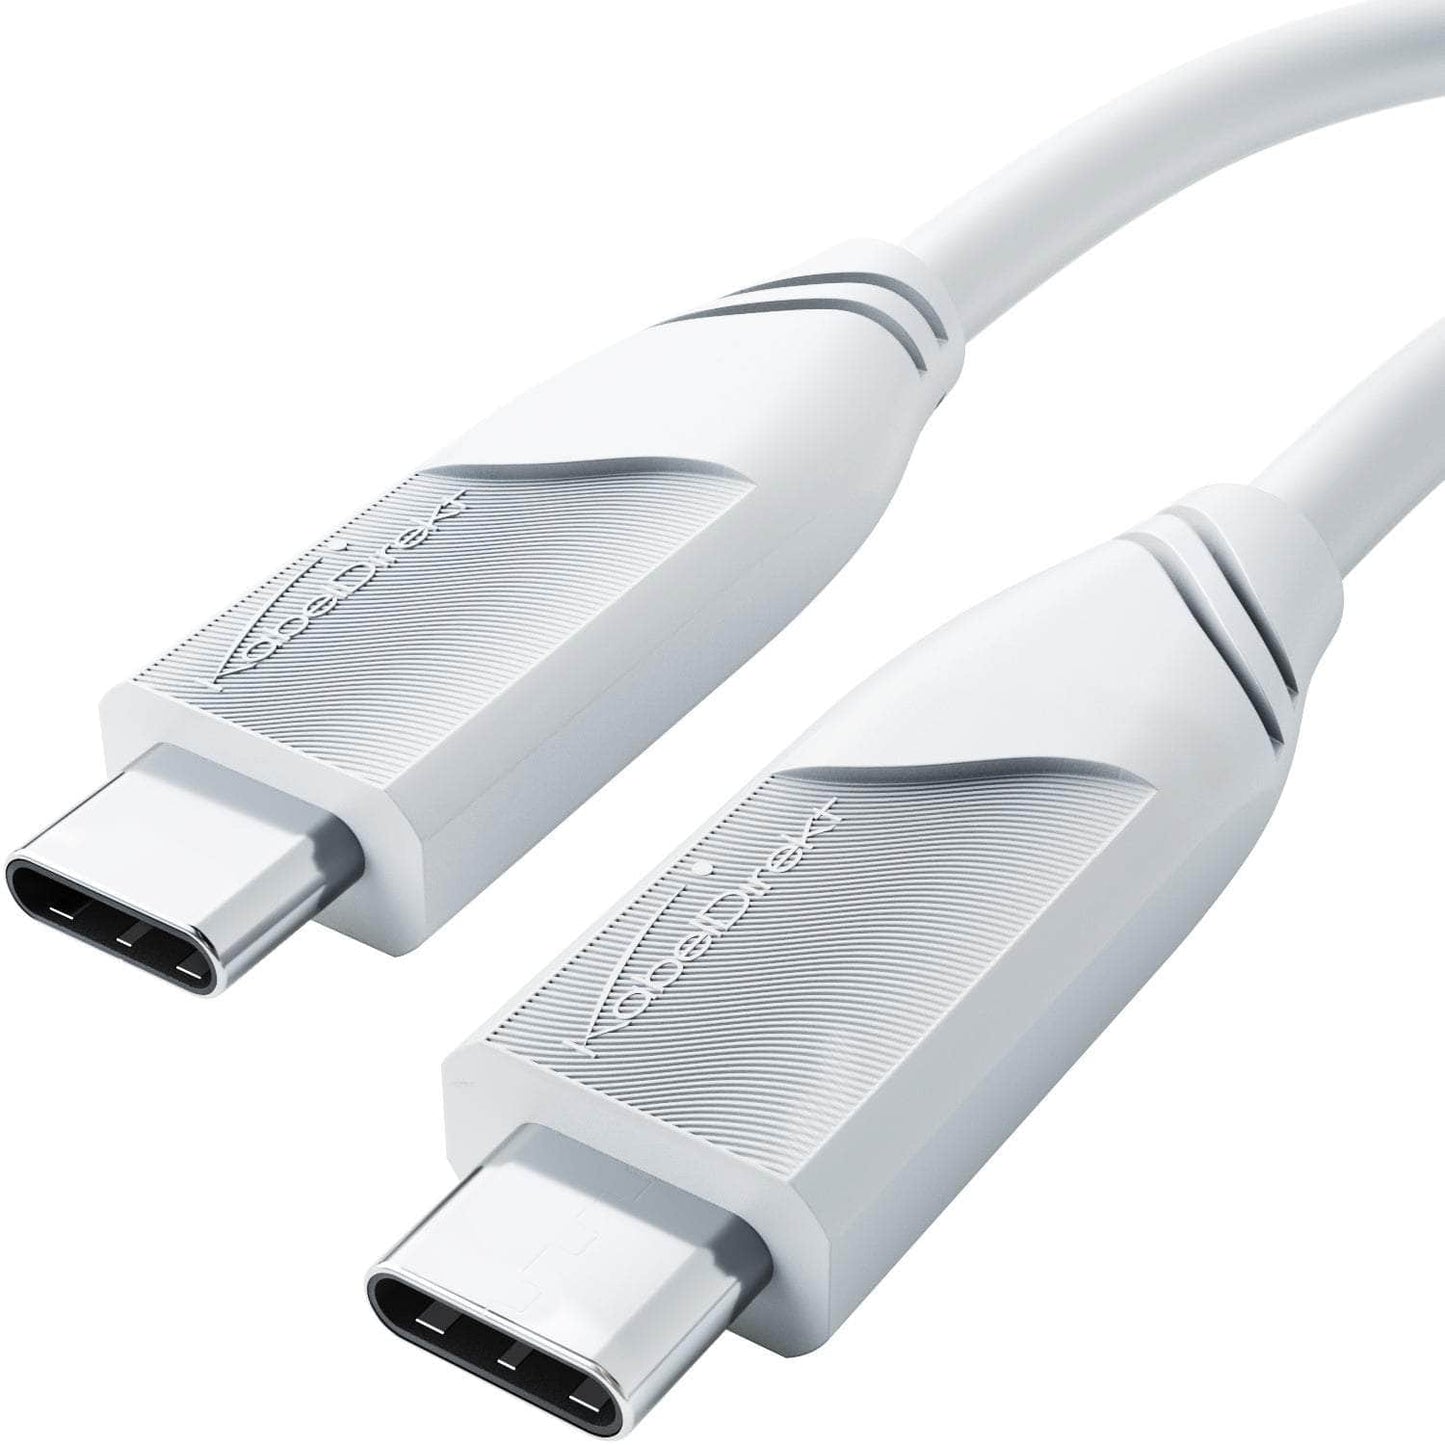 USB C Cable - USB 4.0, Power Delivery 3, Thunderbolt 4, white - 2m